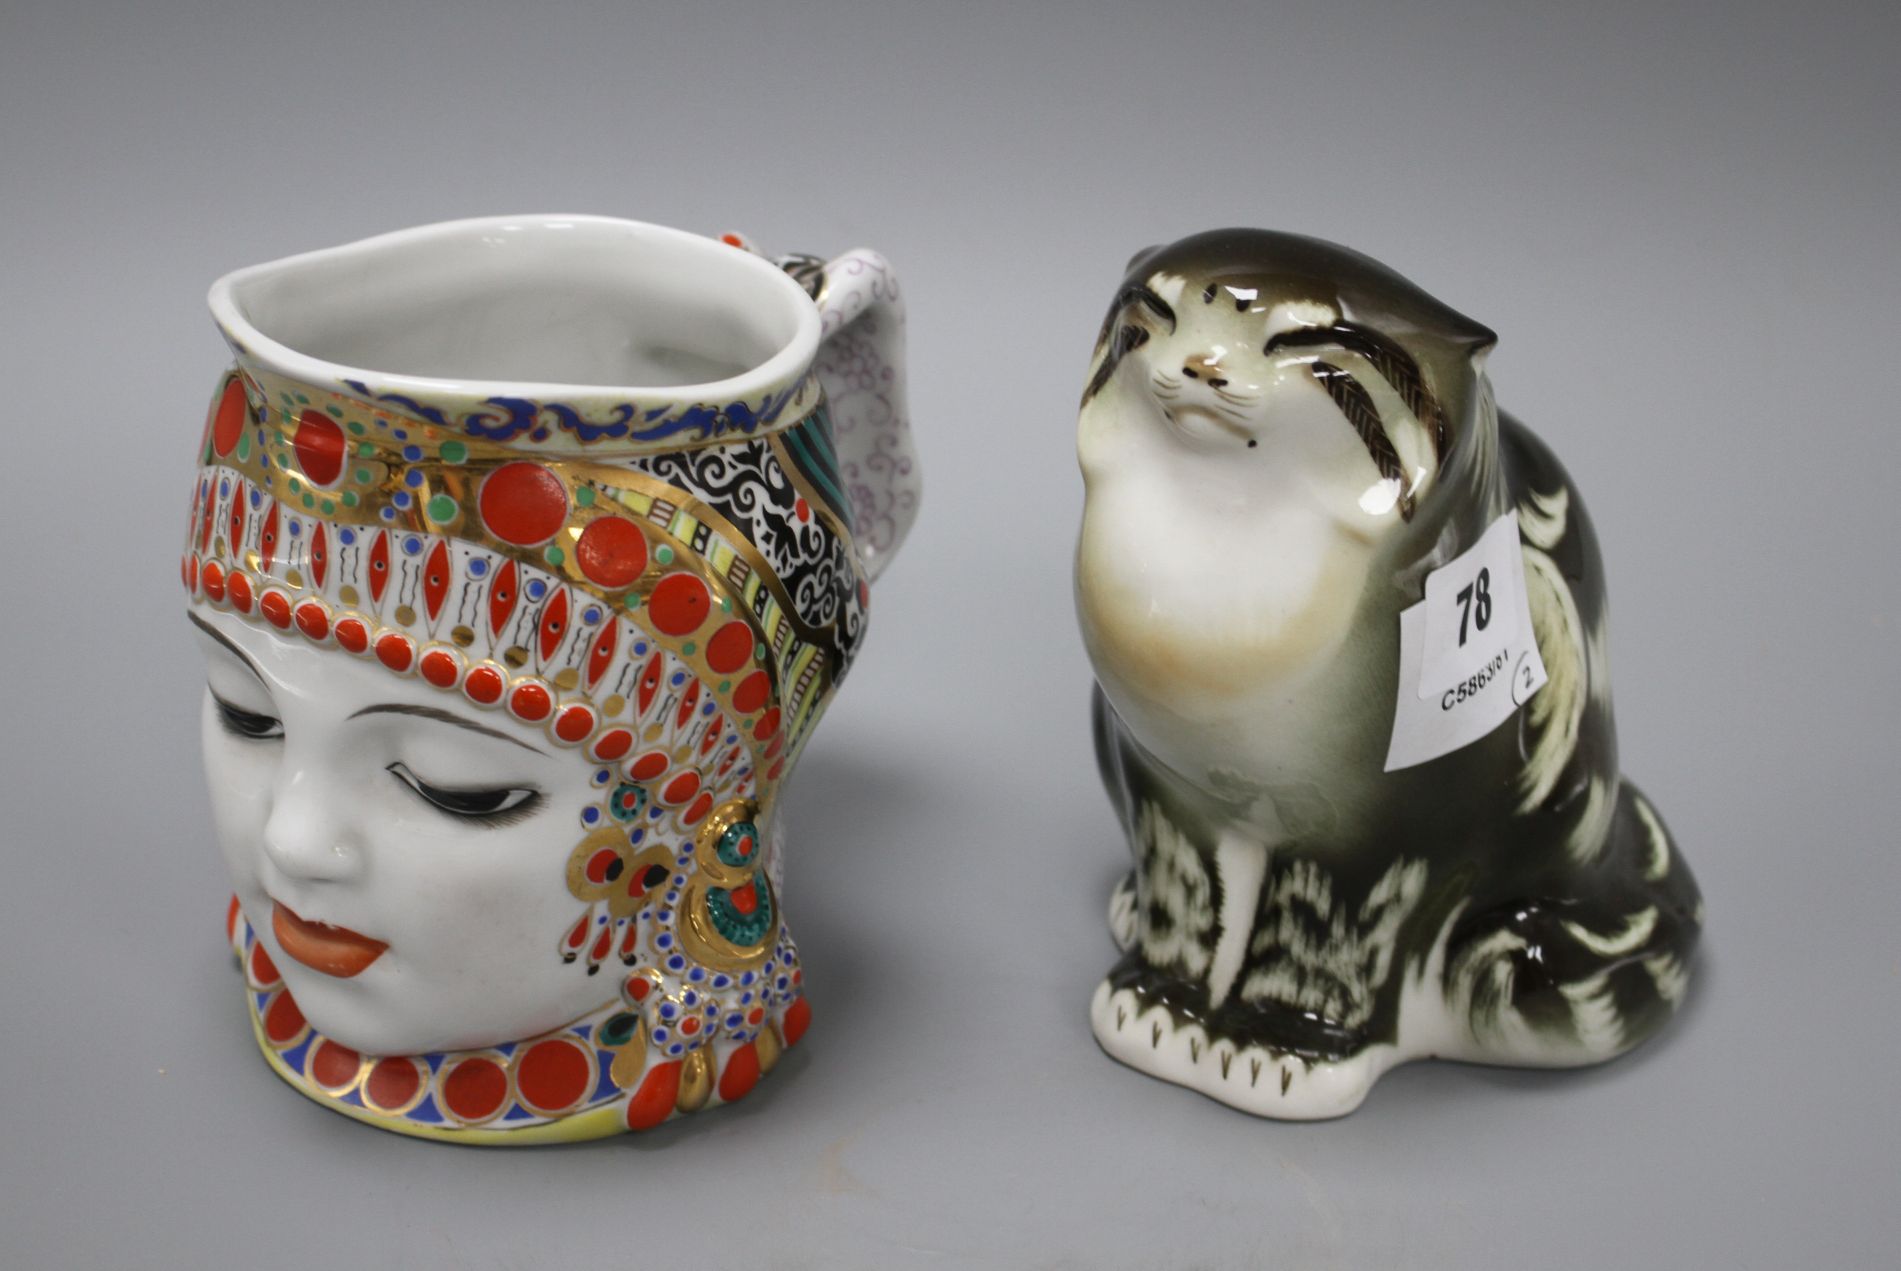 A Russian ceramic figure of a seated cat, height 15cm, and a character jug depicting a woman's